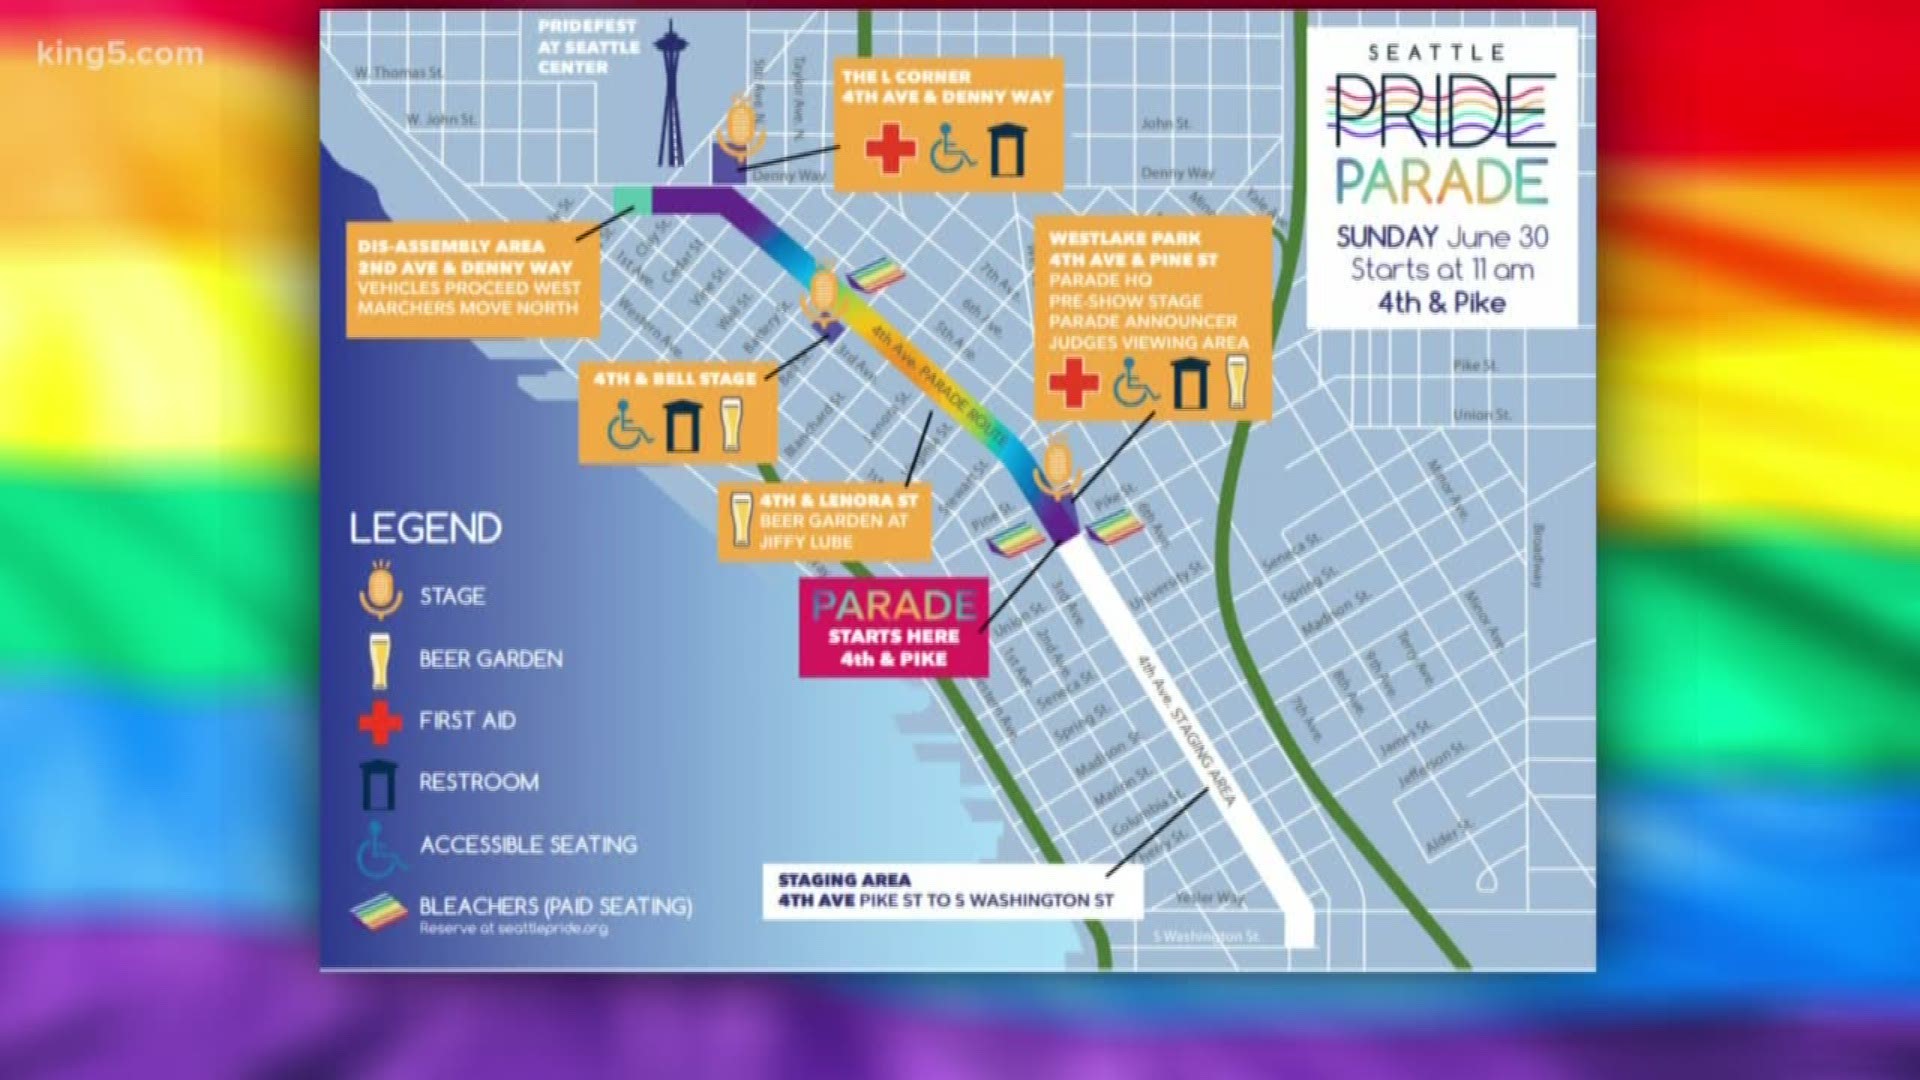 Seattle celebrates 45th annual pride parade and vows to 'keep fighting